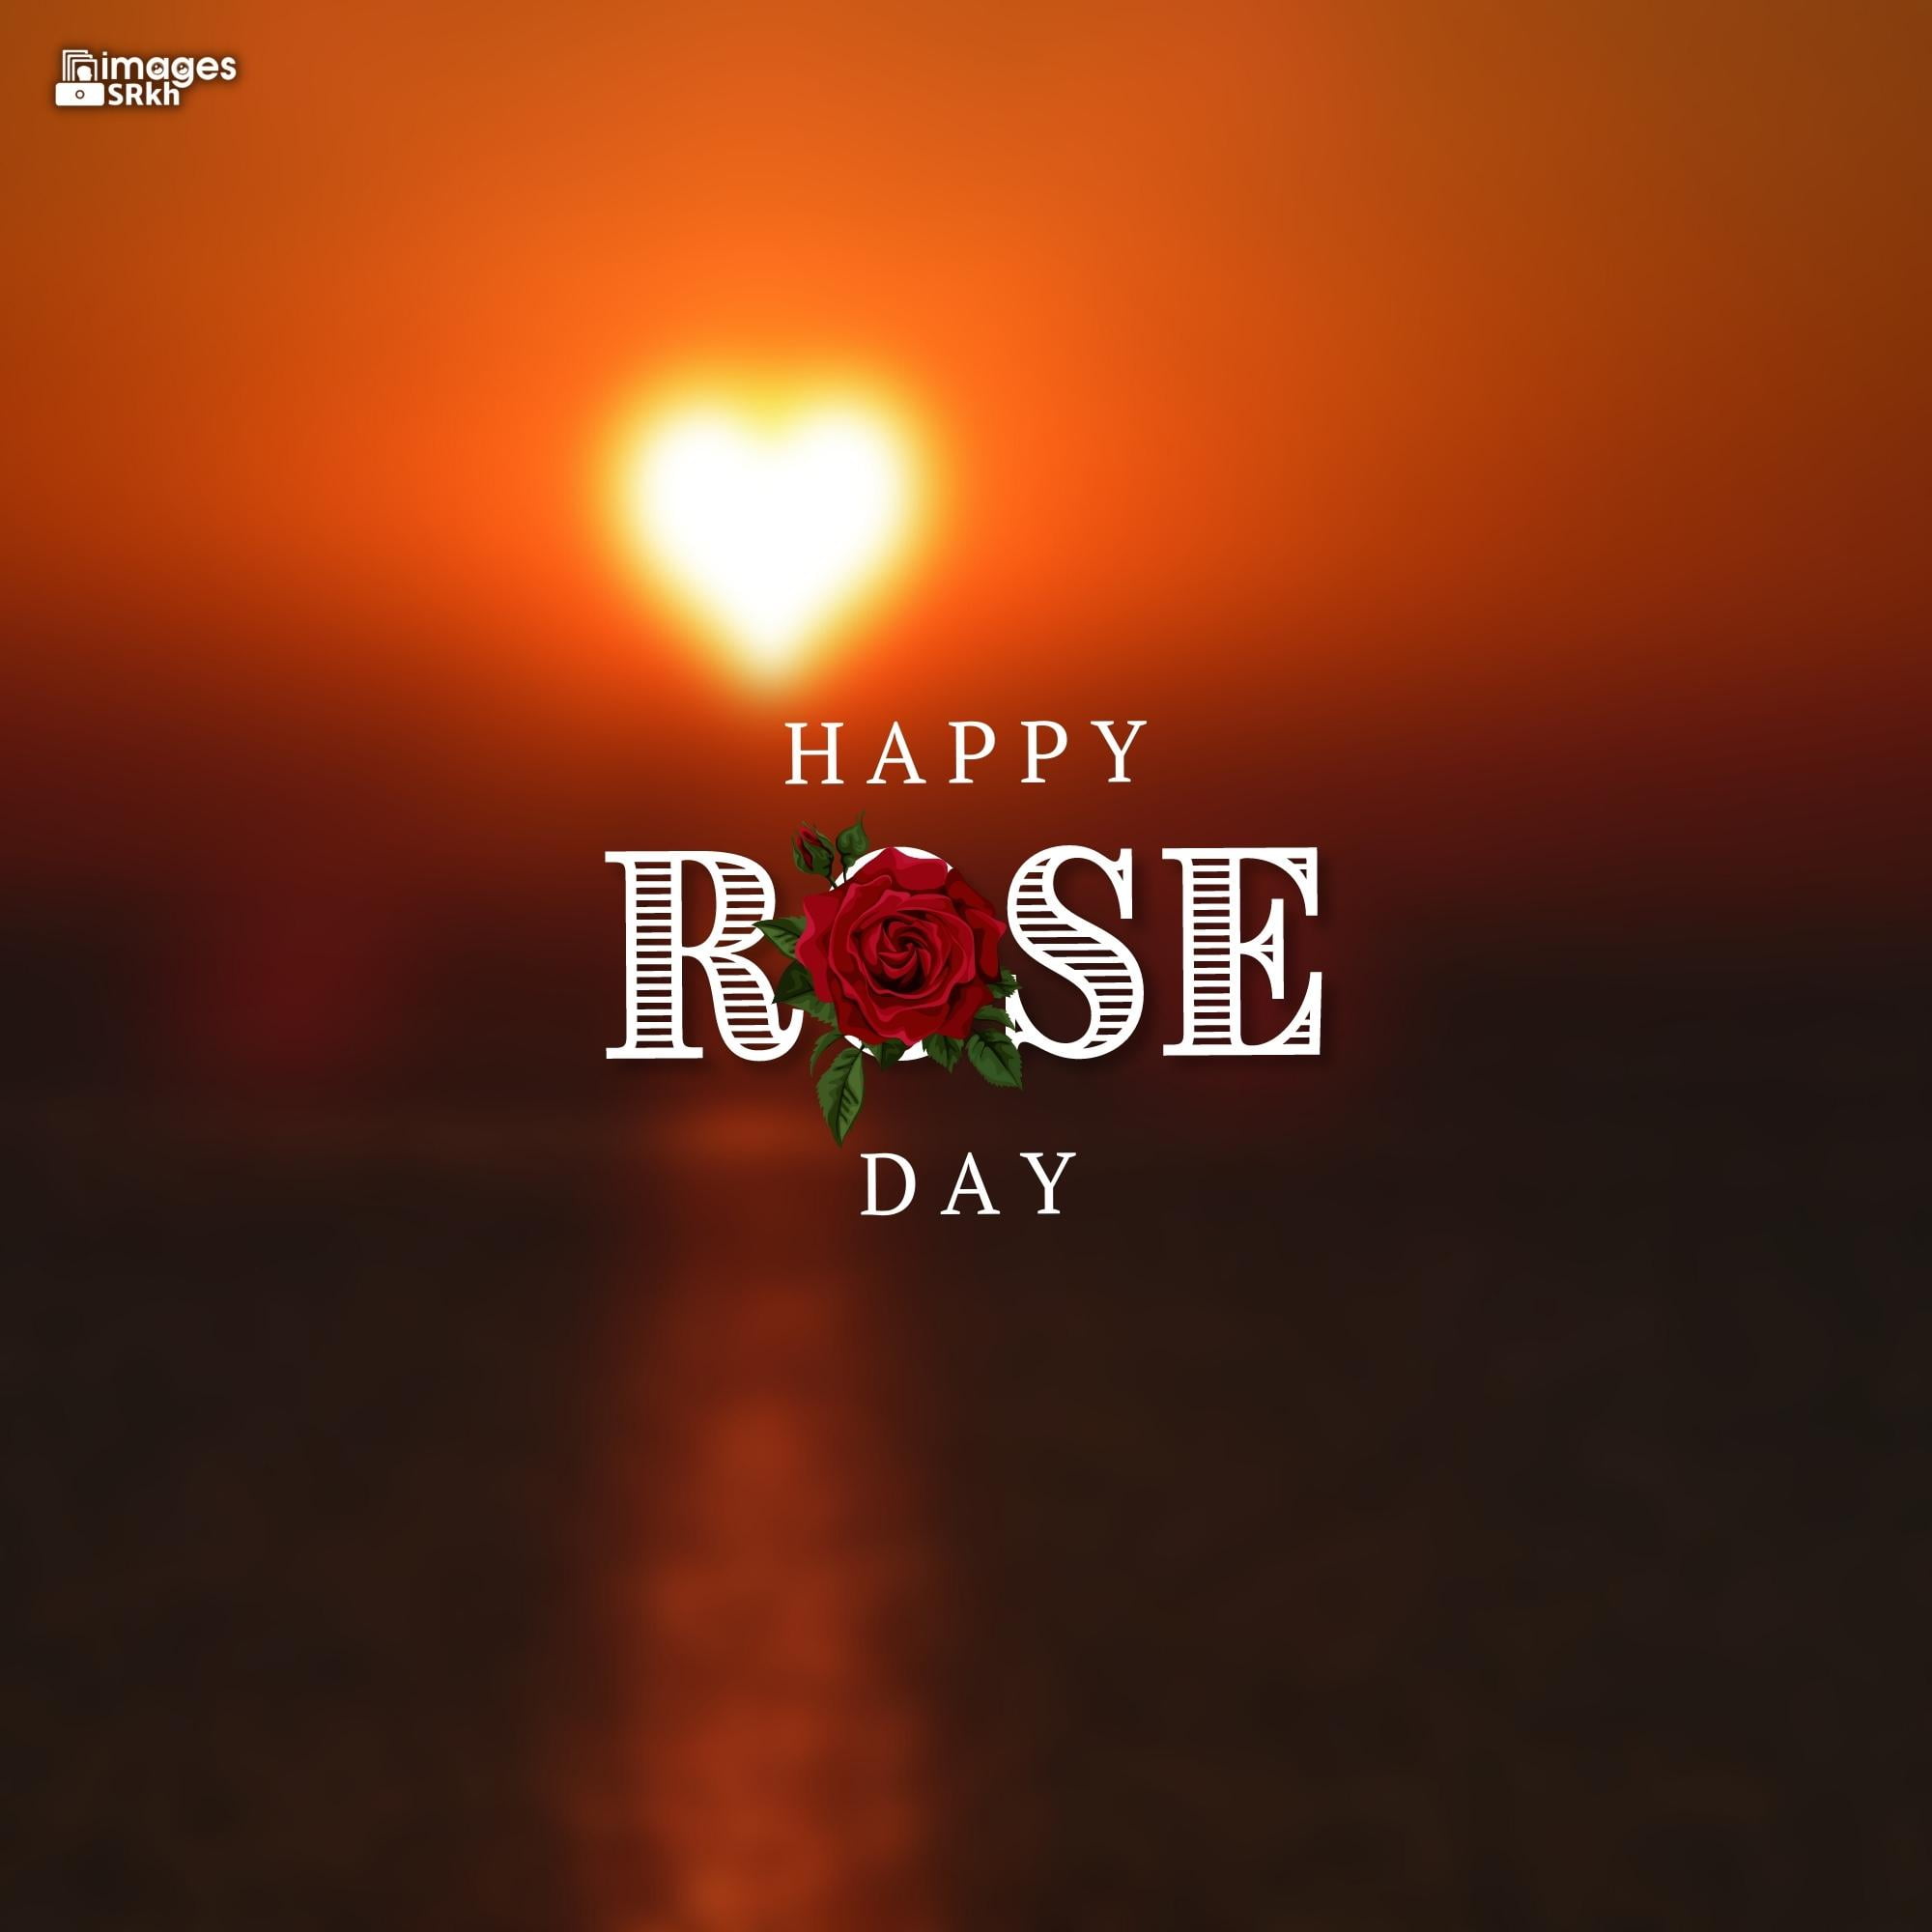 Romantic Rose Day Images Hd Download (3)